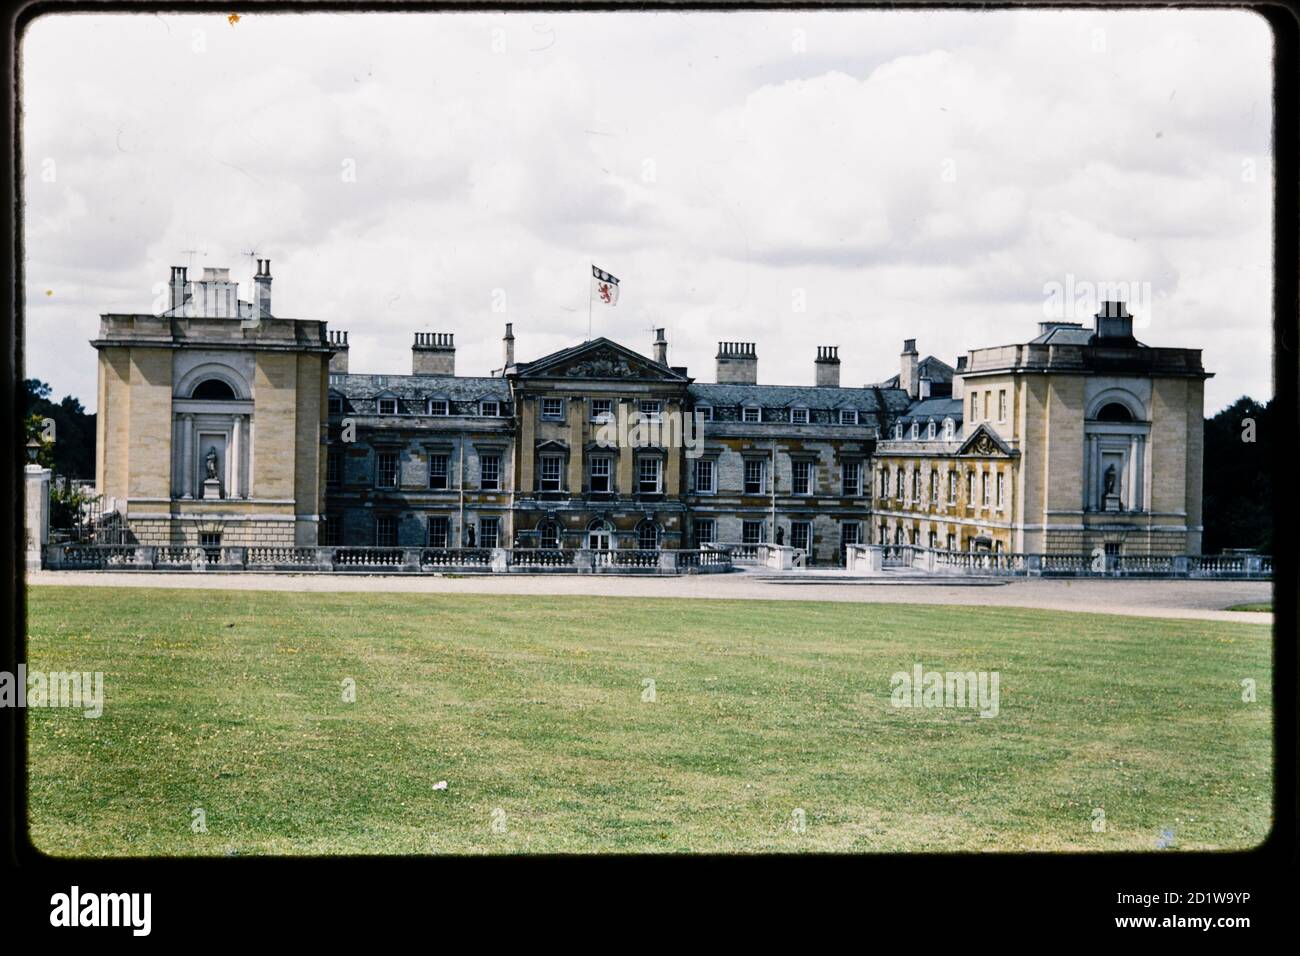 Woburn Abbey, Woburn, Bedfordshire. The east facade and courtyard of Woburn Abbey, viewed from the south east. Stock Photo